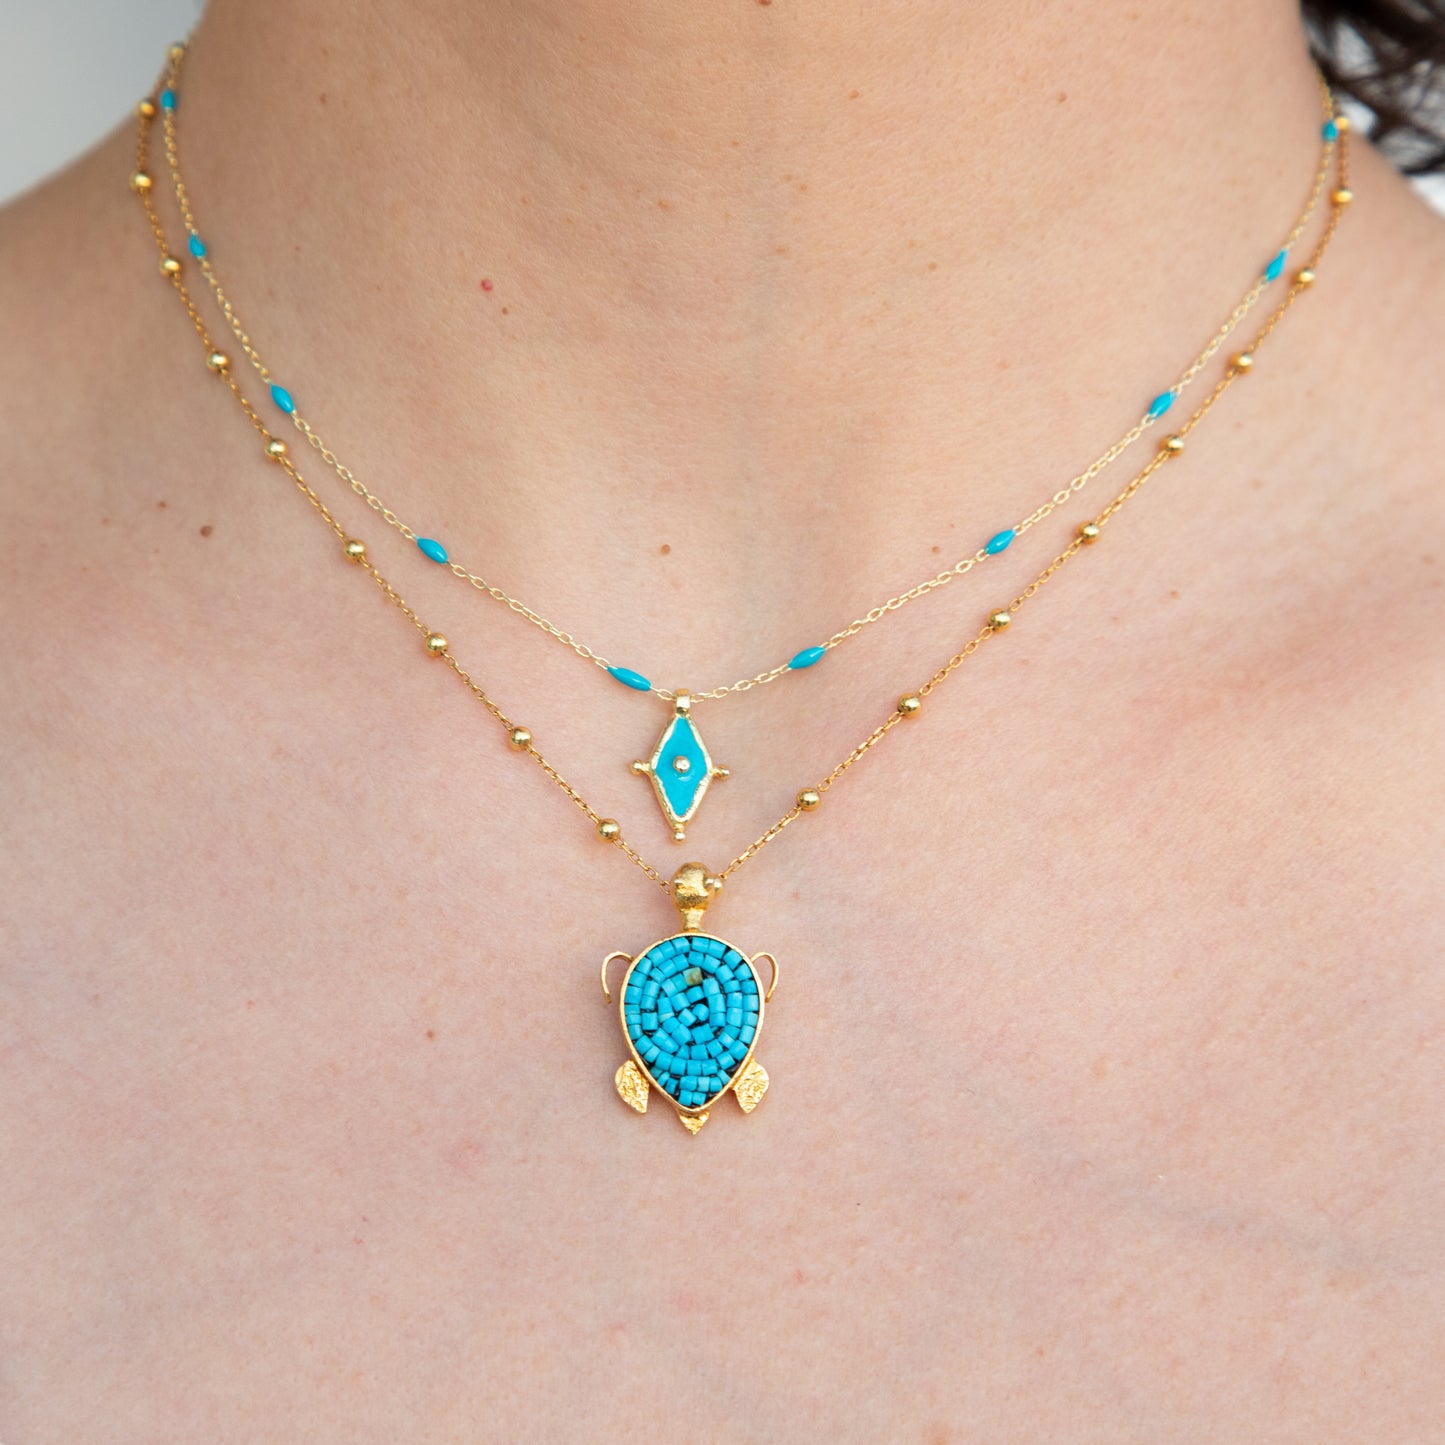 Turquoise “Turtle” Necklace